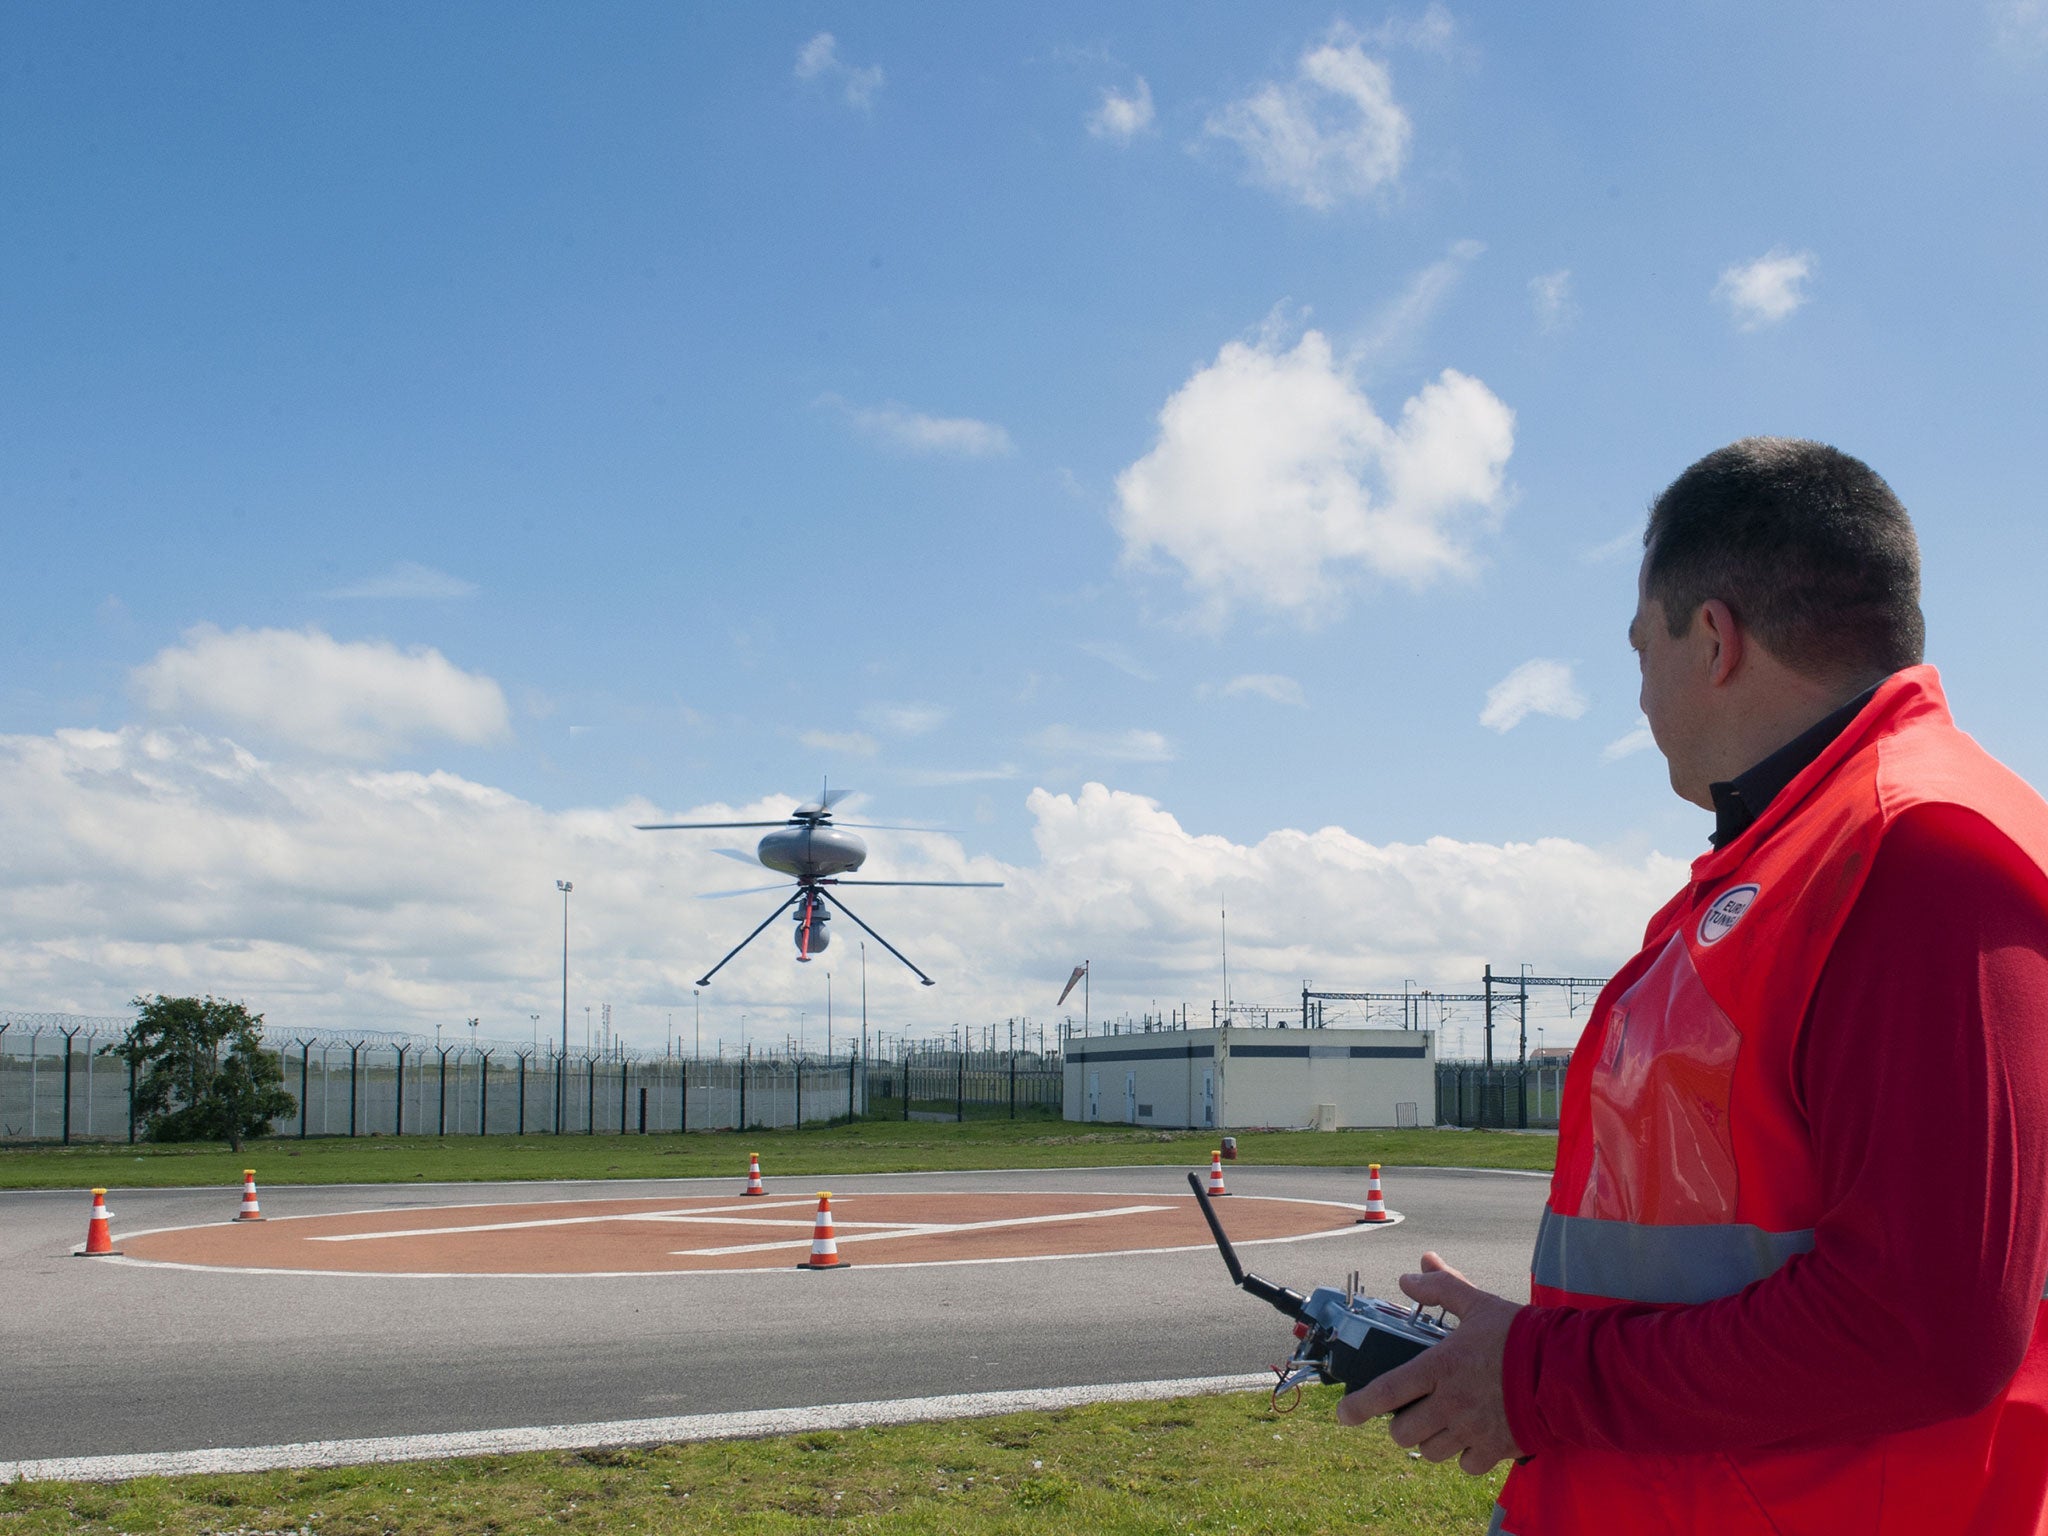 Eurotunnel said the two drones will be used to carry out surveillance if migrants are believed to be in secure areas surrounding the Channel Tunnel